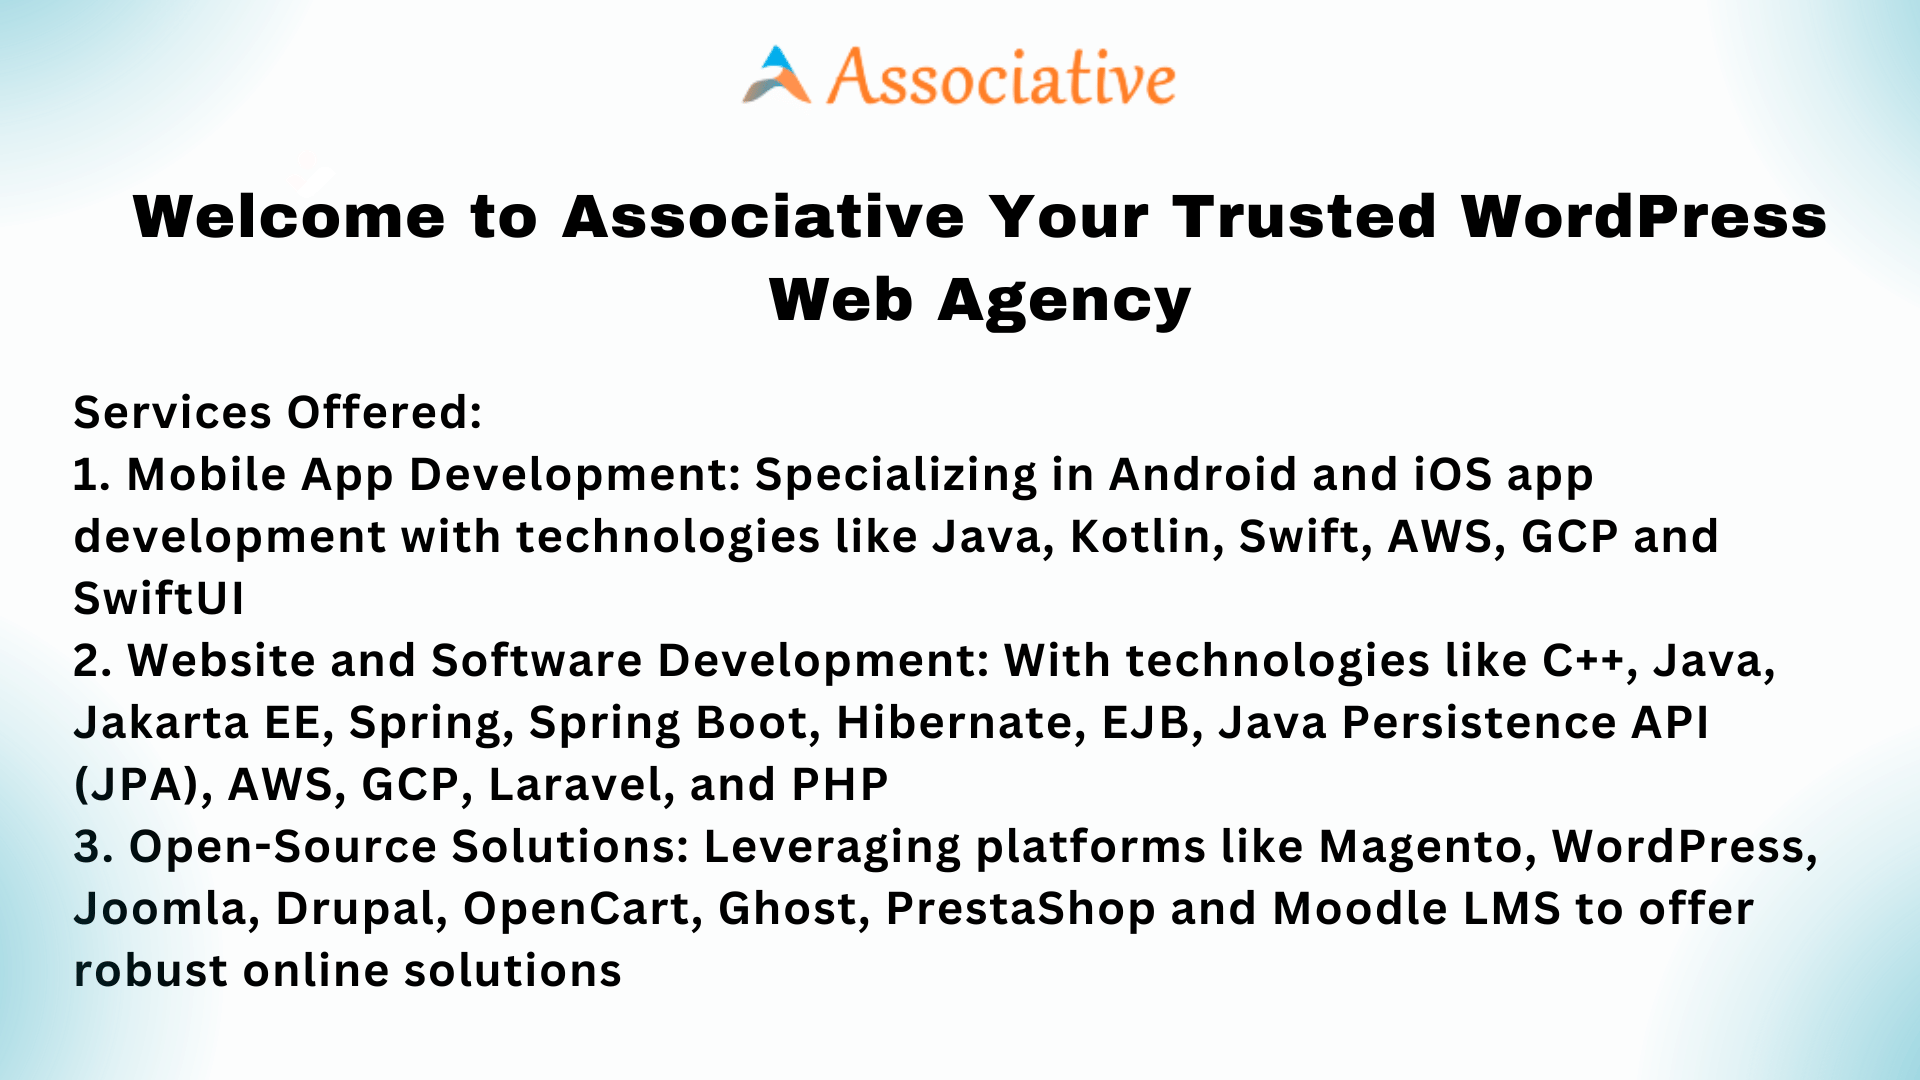 Welcome to Associative Your Trusted WordPress Web Agency